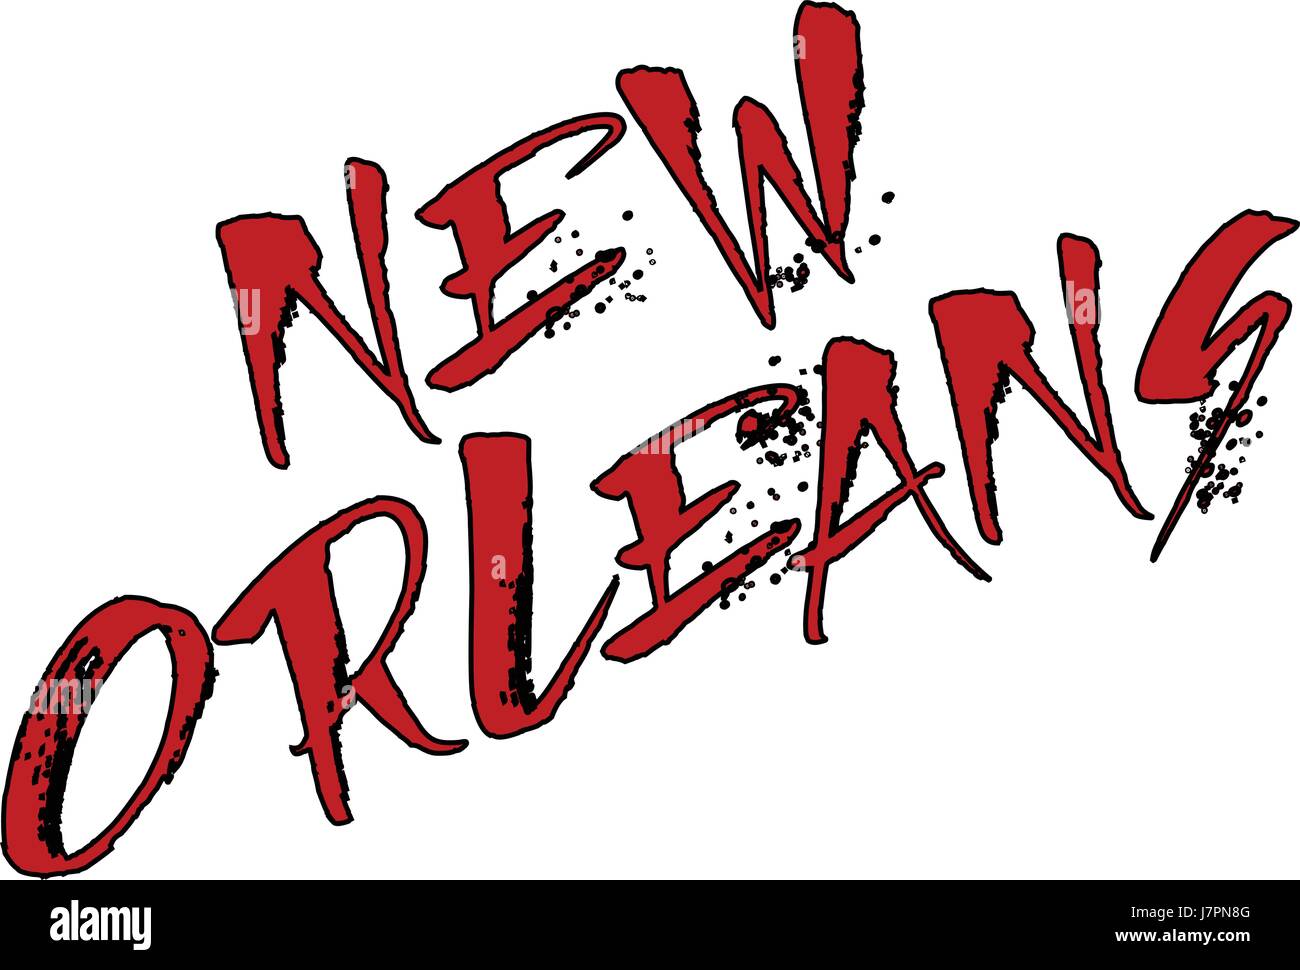 New Orleans text illustration on white background Stock Vector